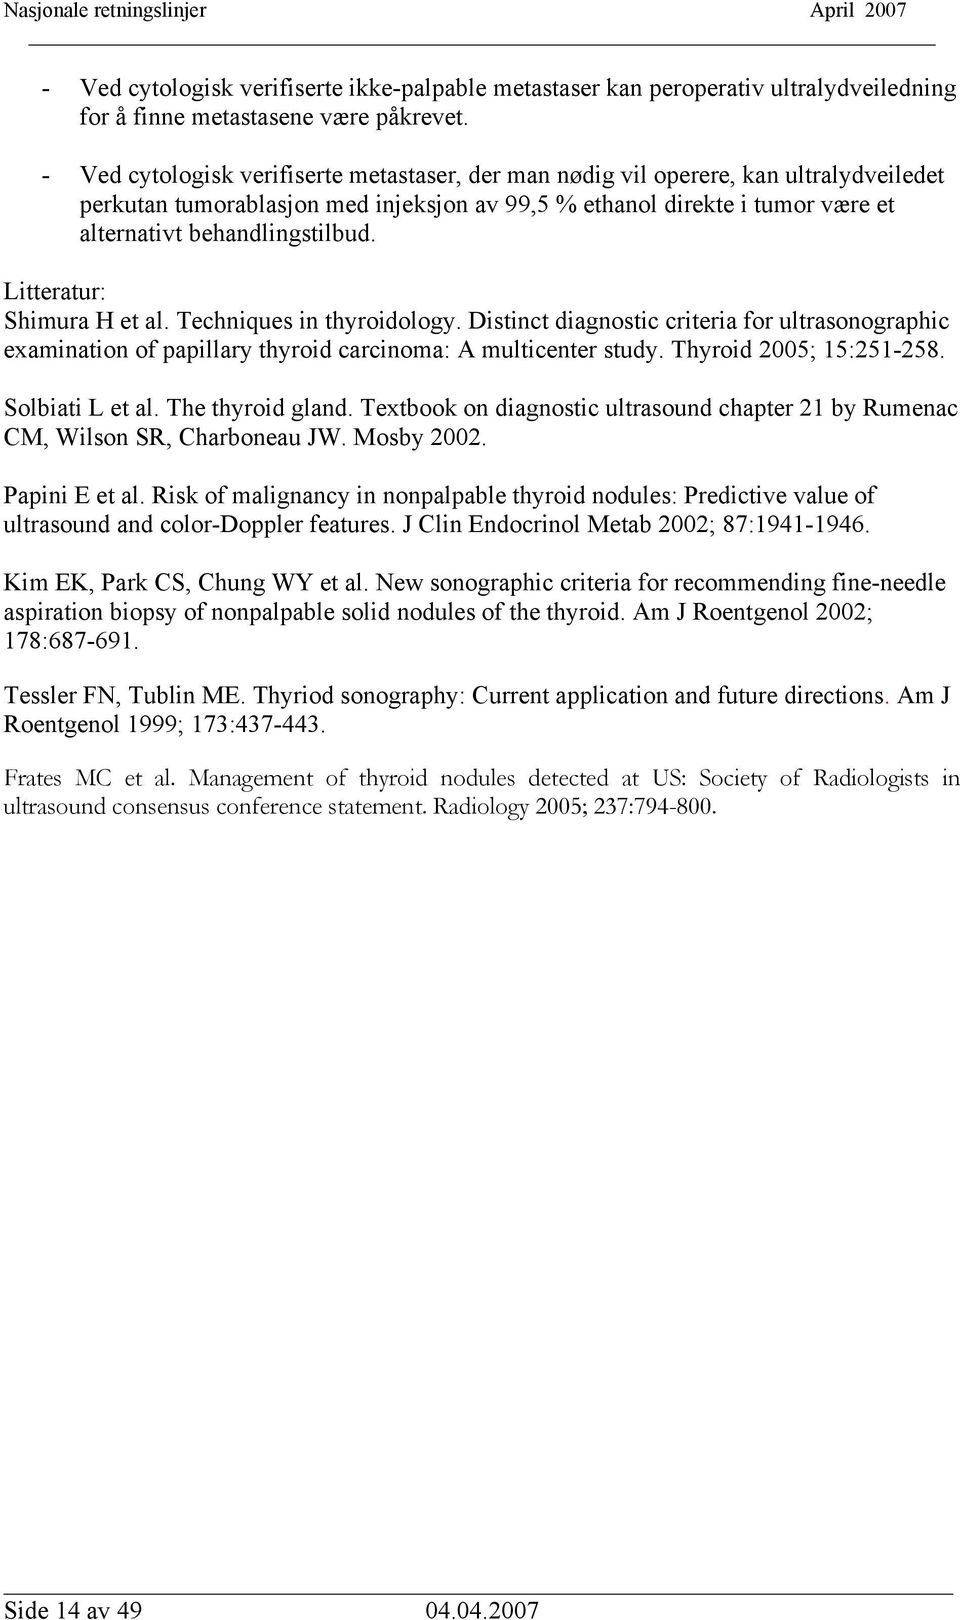 Litteratur: Shimura H et al. Techniques in thyroidology. Distinct diagnostic criteria for ultrasonographic examination of papillary thyroid carcinoma: A multicenter study. Thyroid 2005; 15:251-258.